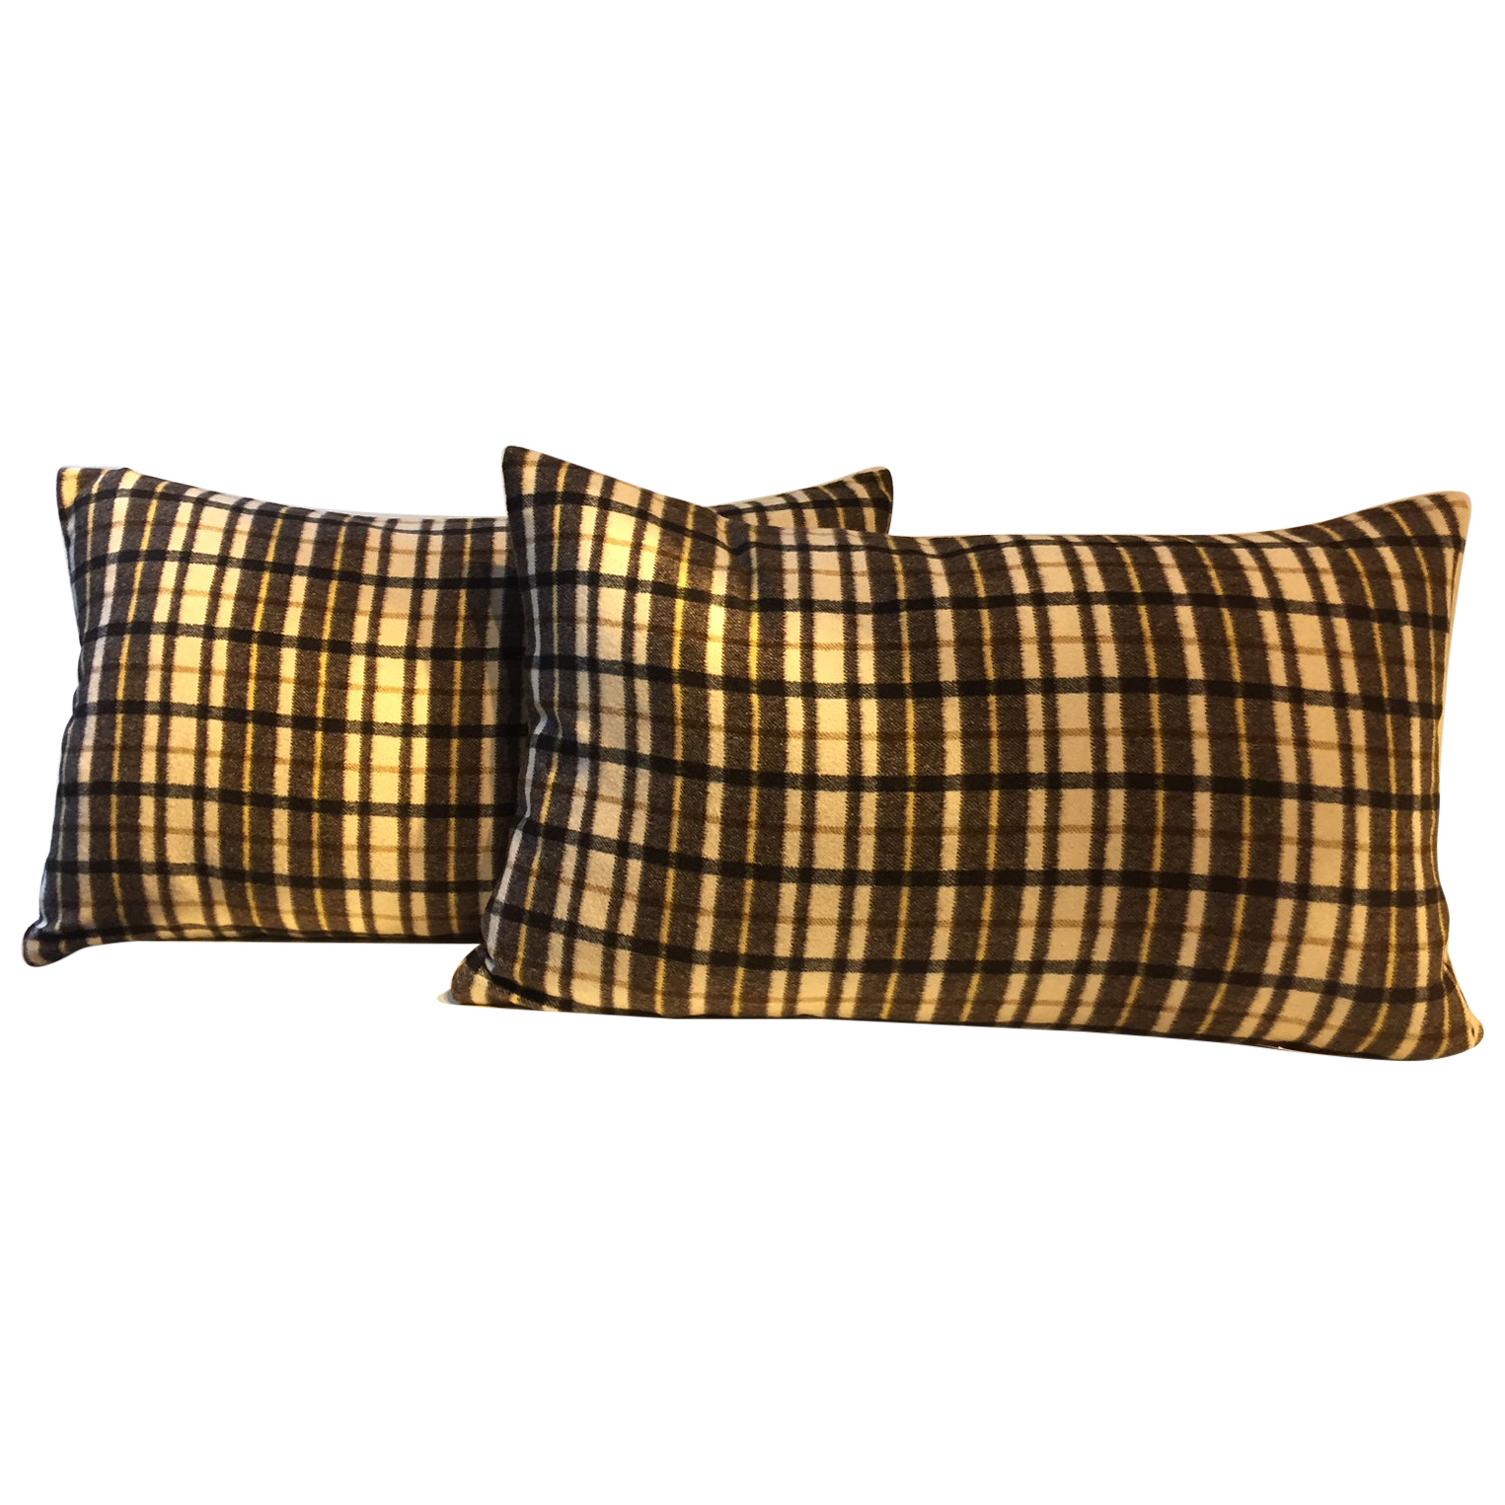 Barbera Cashmere Cushions Black and Brown Woven Check Pattern on Ivory